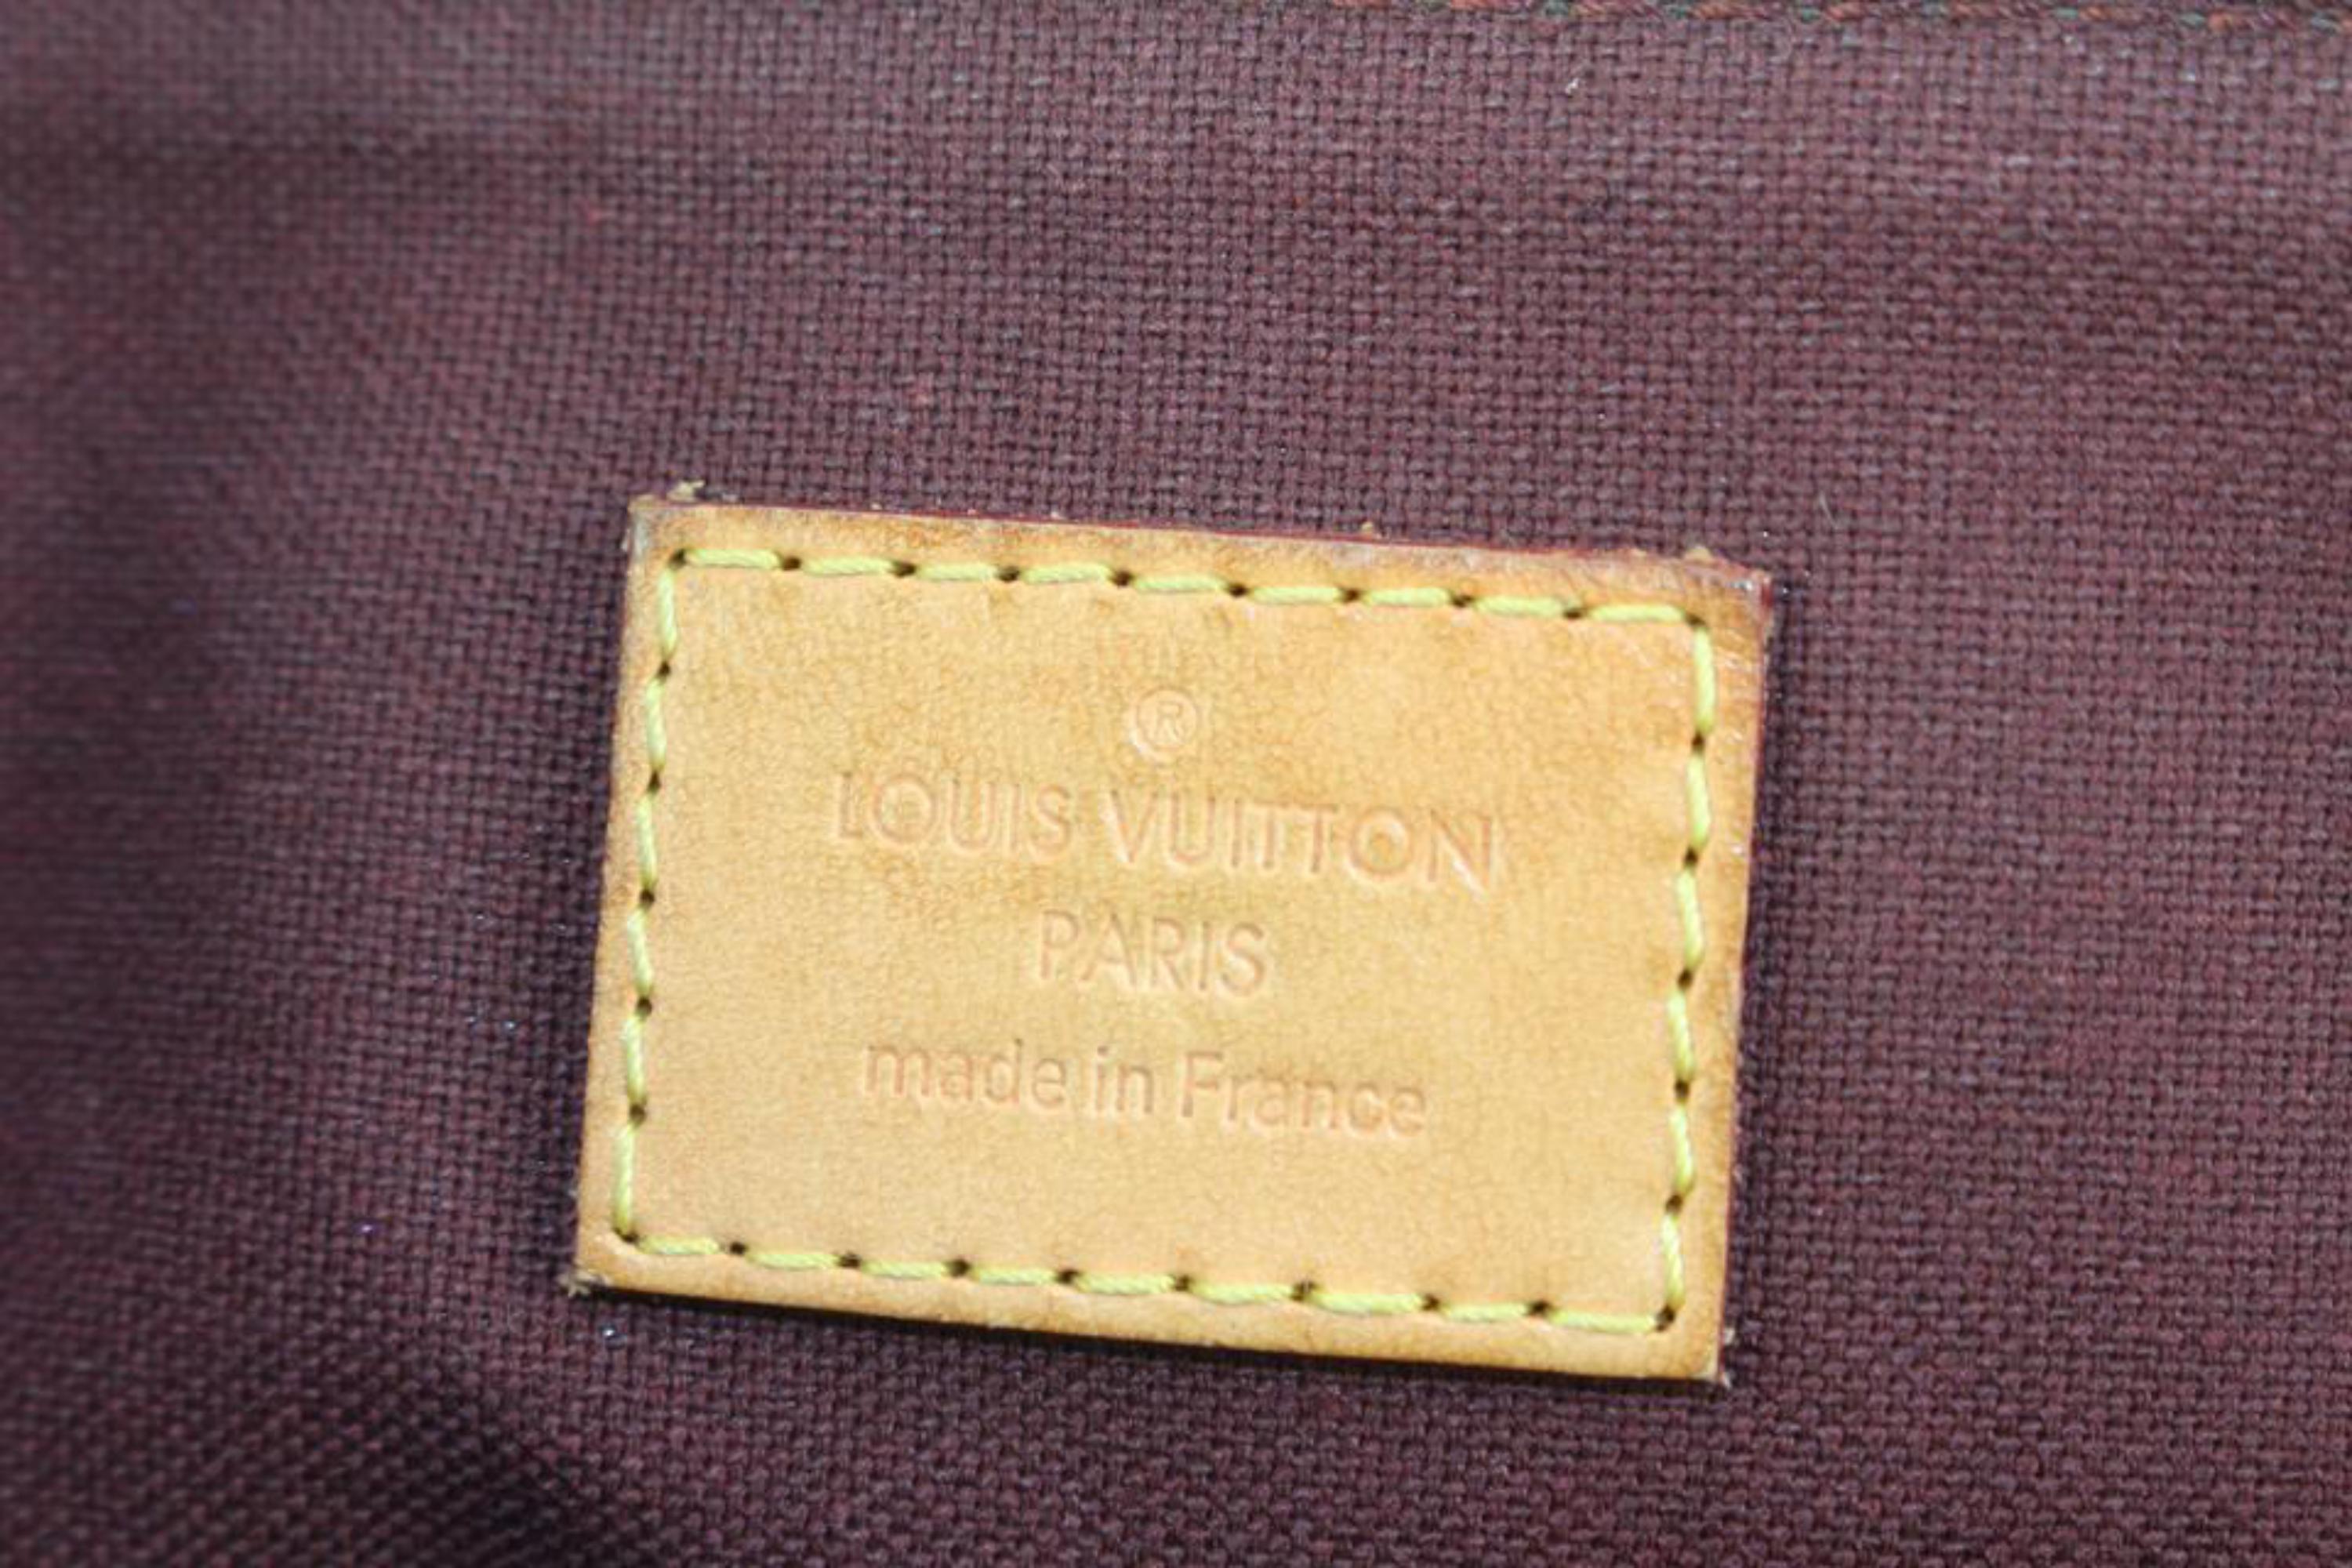 LOT:1183  (110686) A louis Vuitton pen, the gold and enamel pen  accompanied by makers case